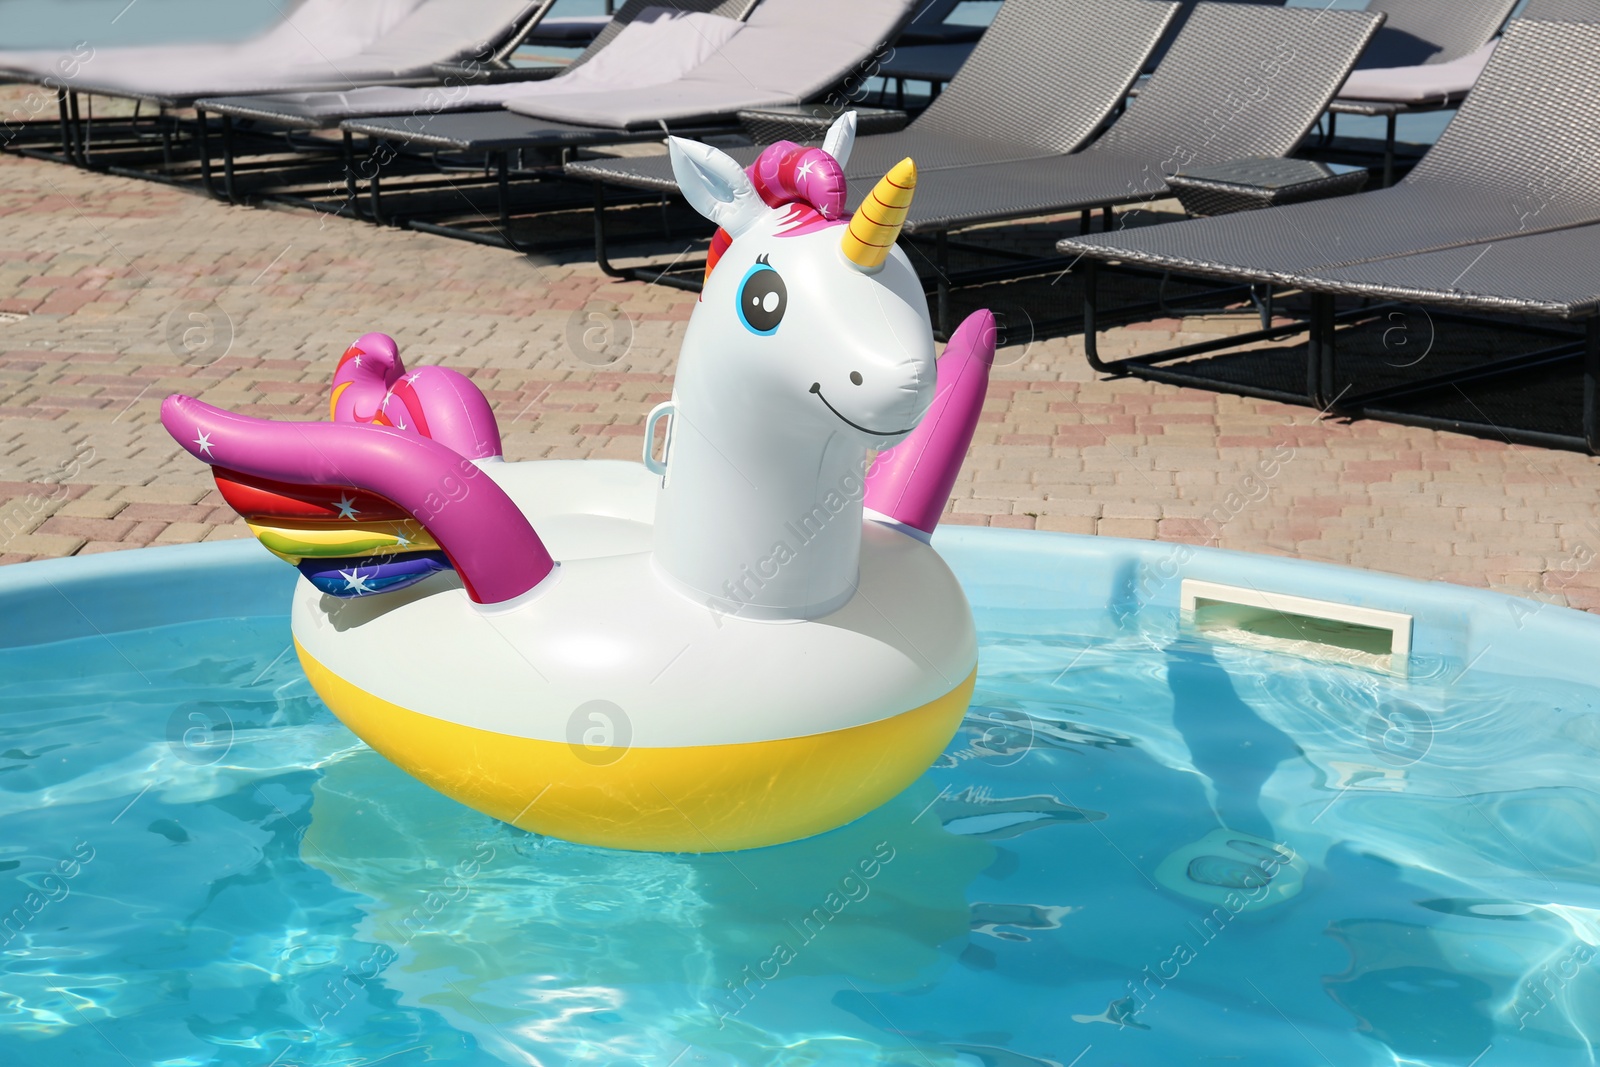 Photo of Funny inflatable unicorn ring floating in swimming pool on sunny day, outdoors